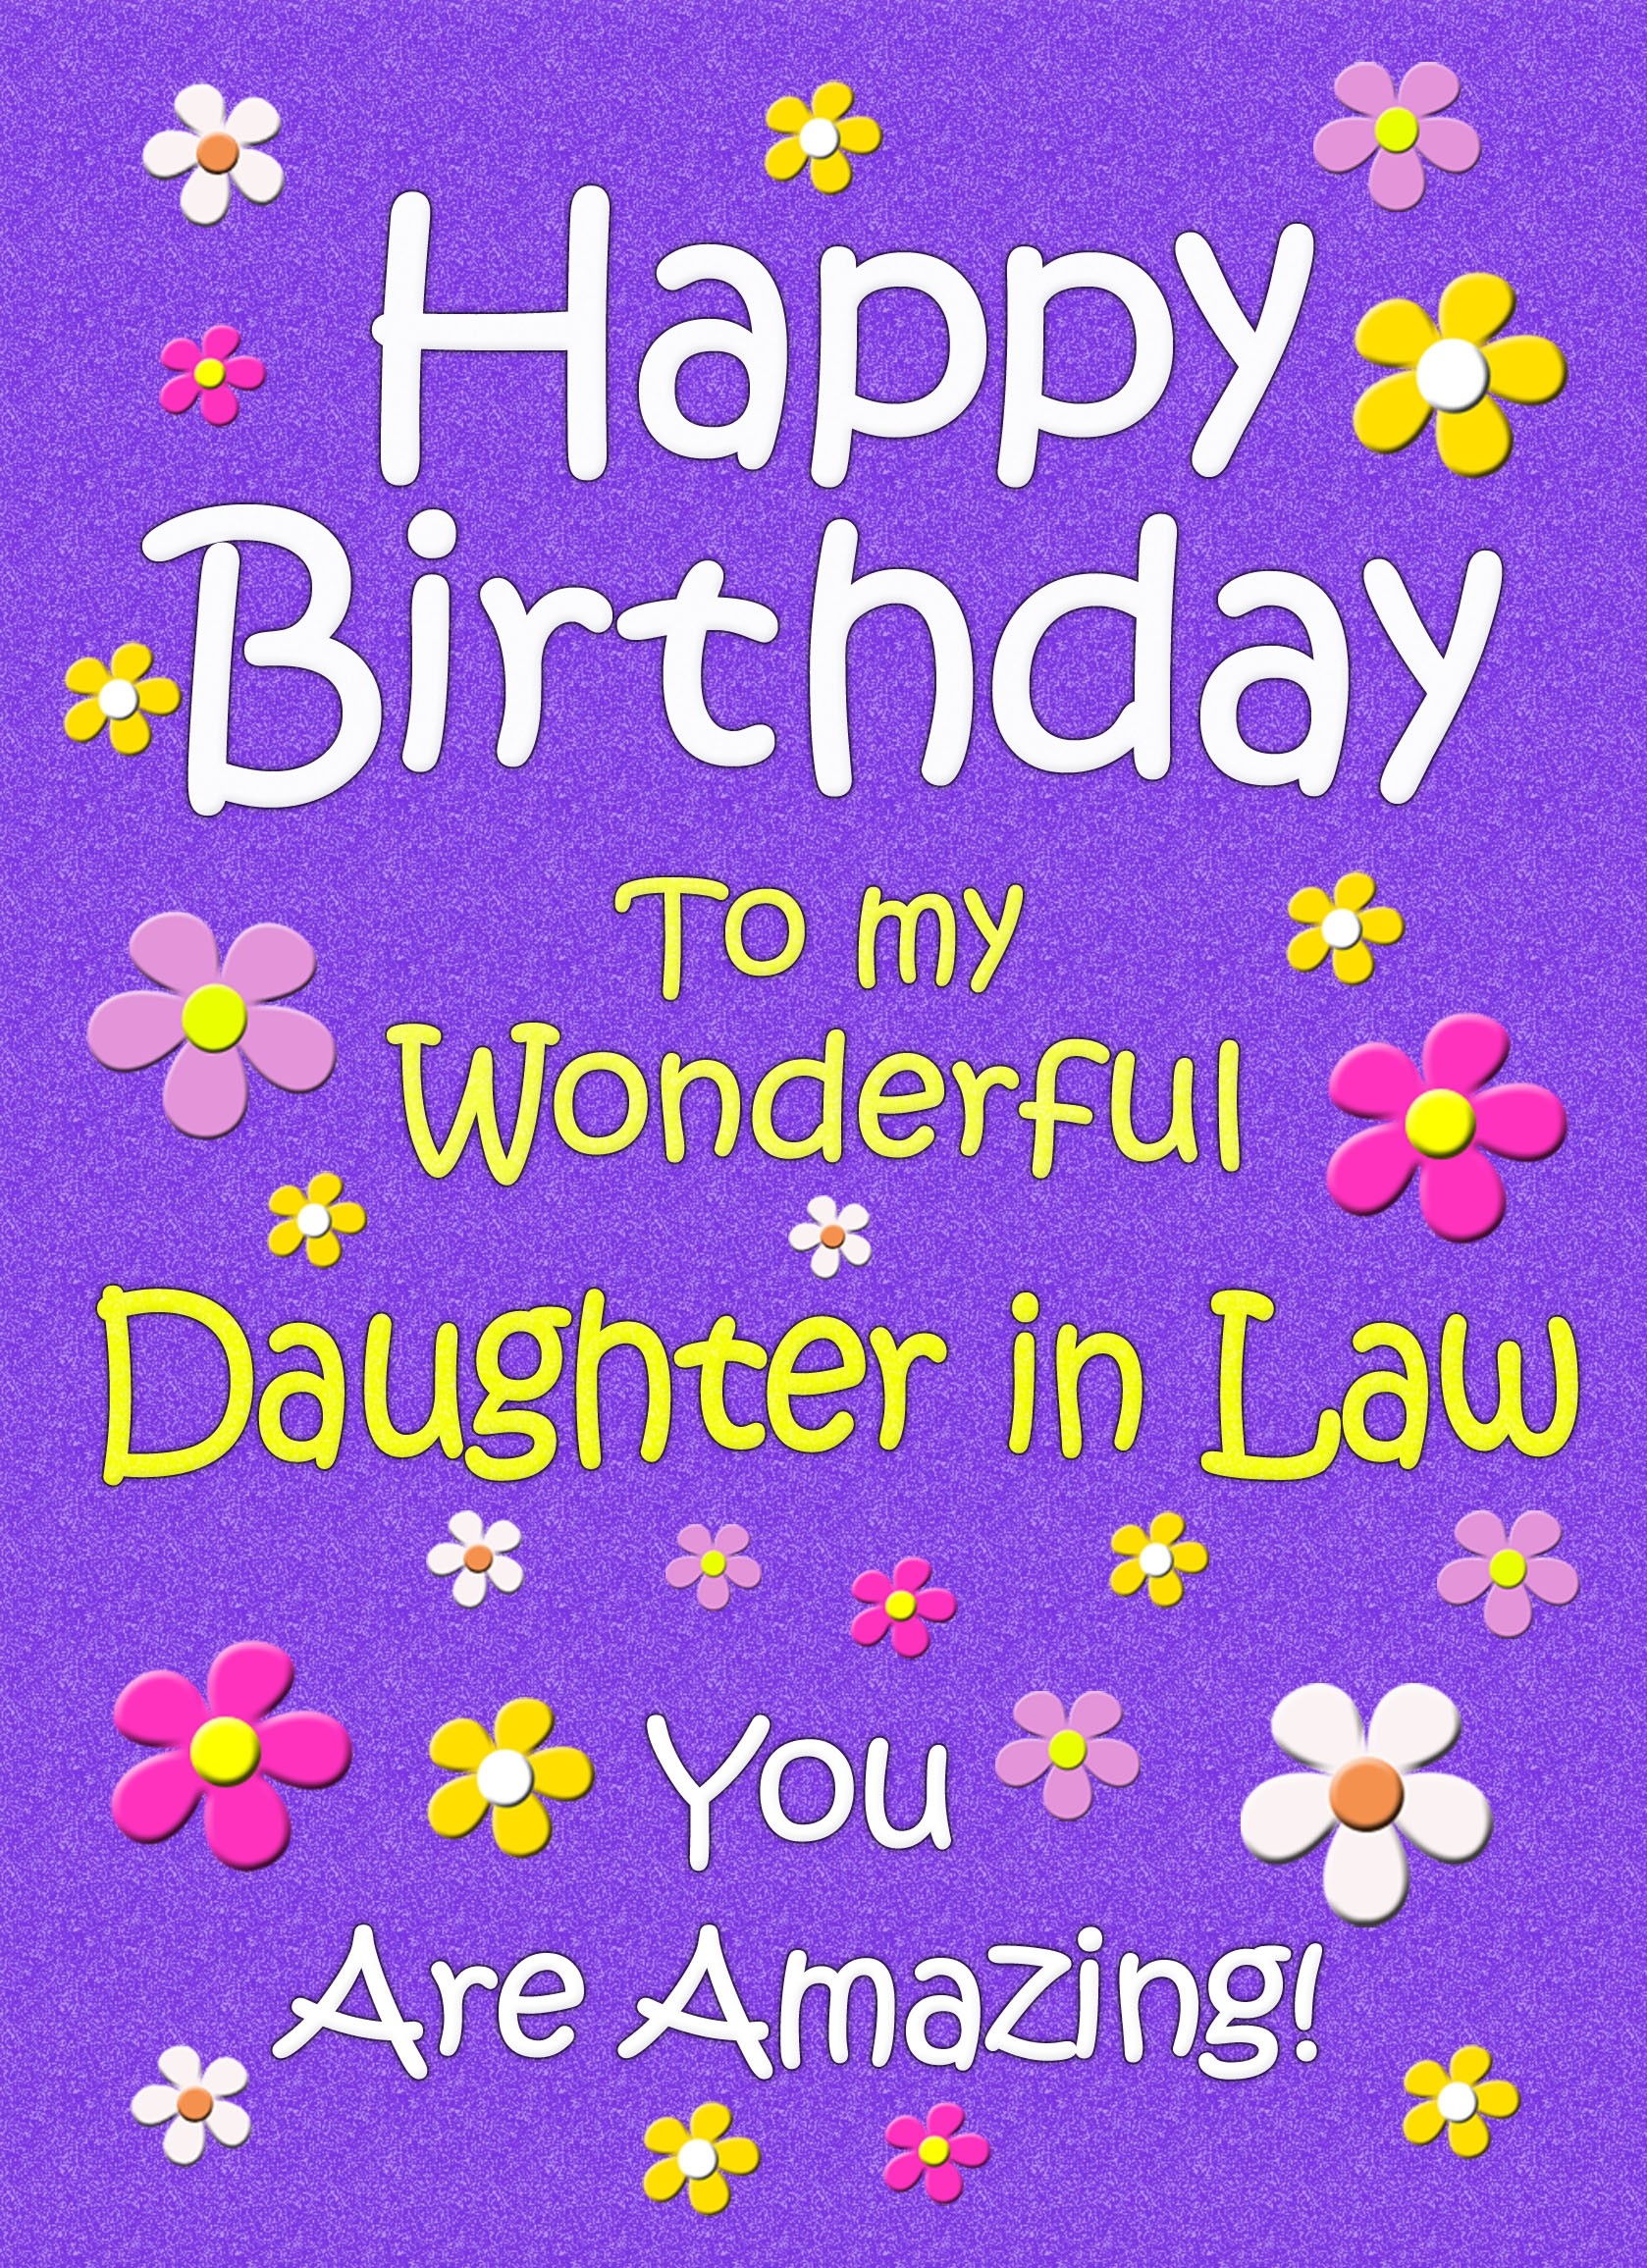 Daughter in Law Birthday Card (Purple)